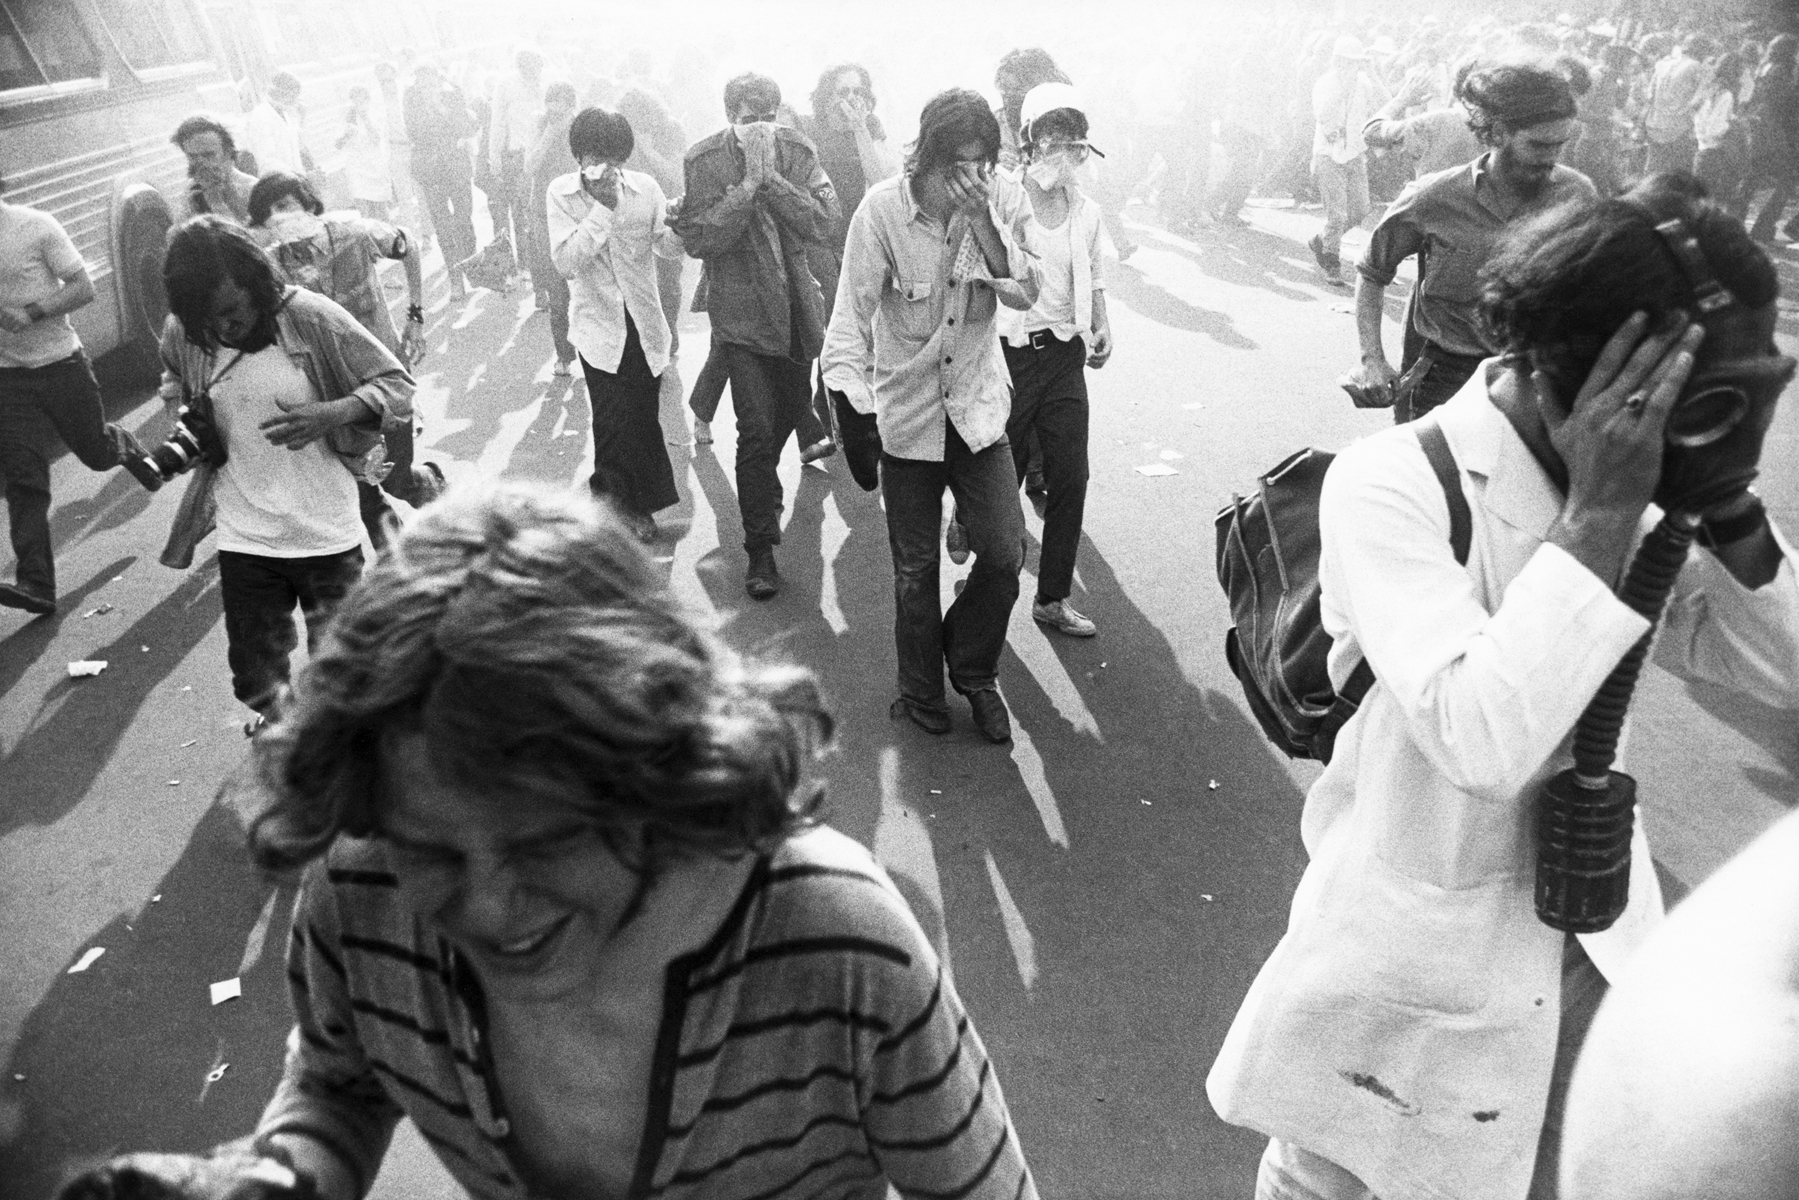     Garry Winogrand, Kent State Demonstration, Washington, D.C., 1970. Gelatin silver print, 35.6 x 43.2 cm. Collection of the Art Gallery of Ontario. Purchase, with funds generously donated by Martha LA McCain, 2015. 2014/1341.
© The Estate of Garry Winogrand, courtesy Fraenkel
Gallery, San Francisco.

